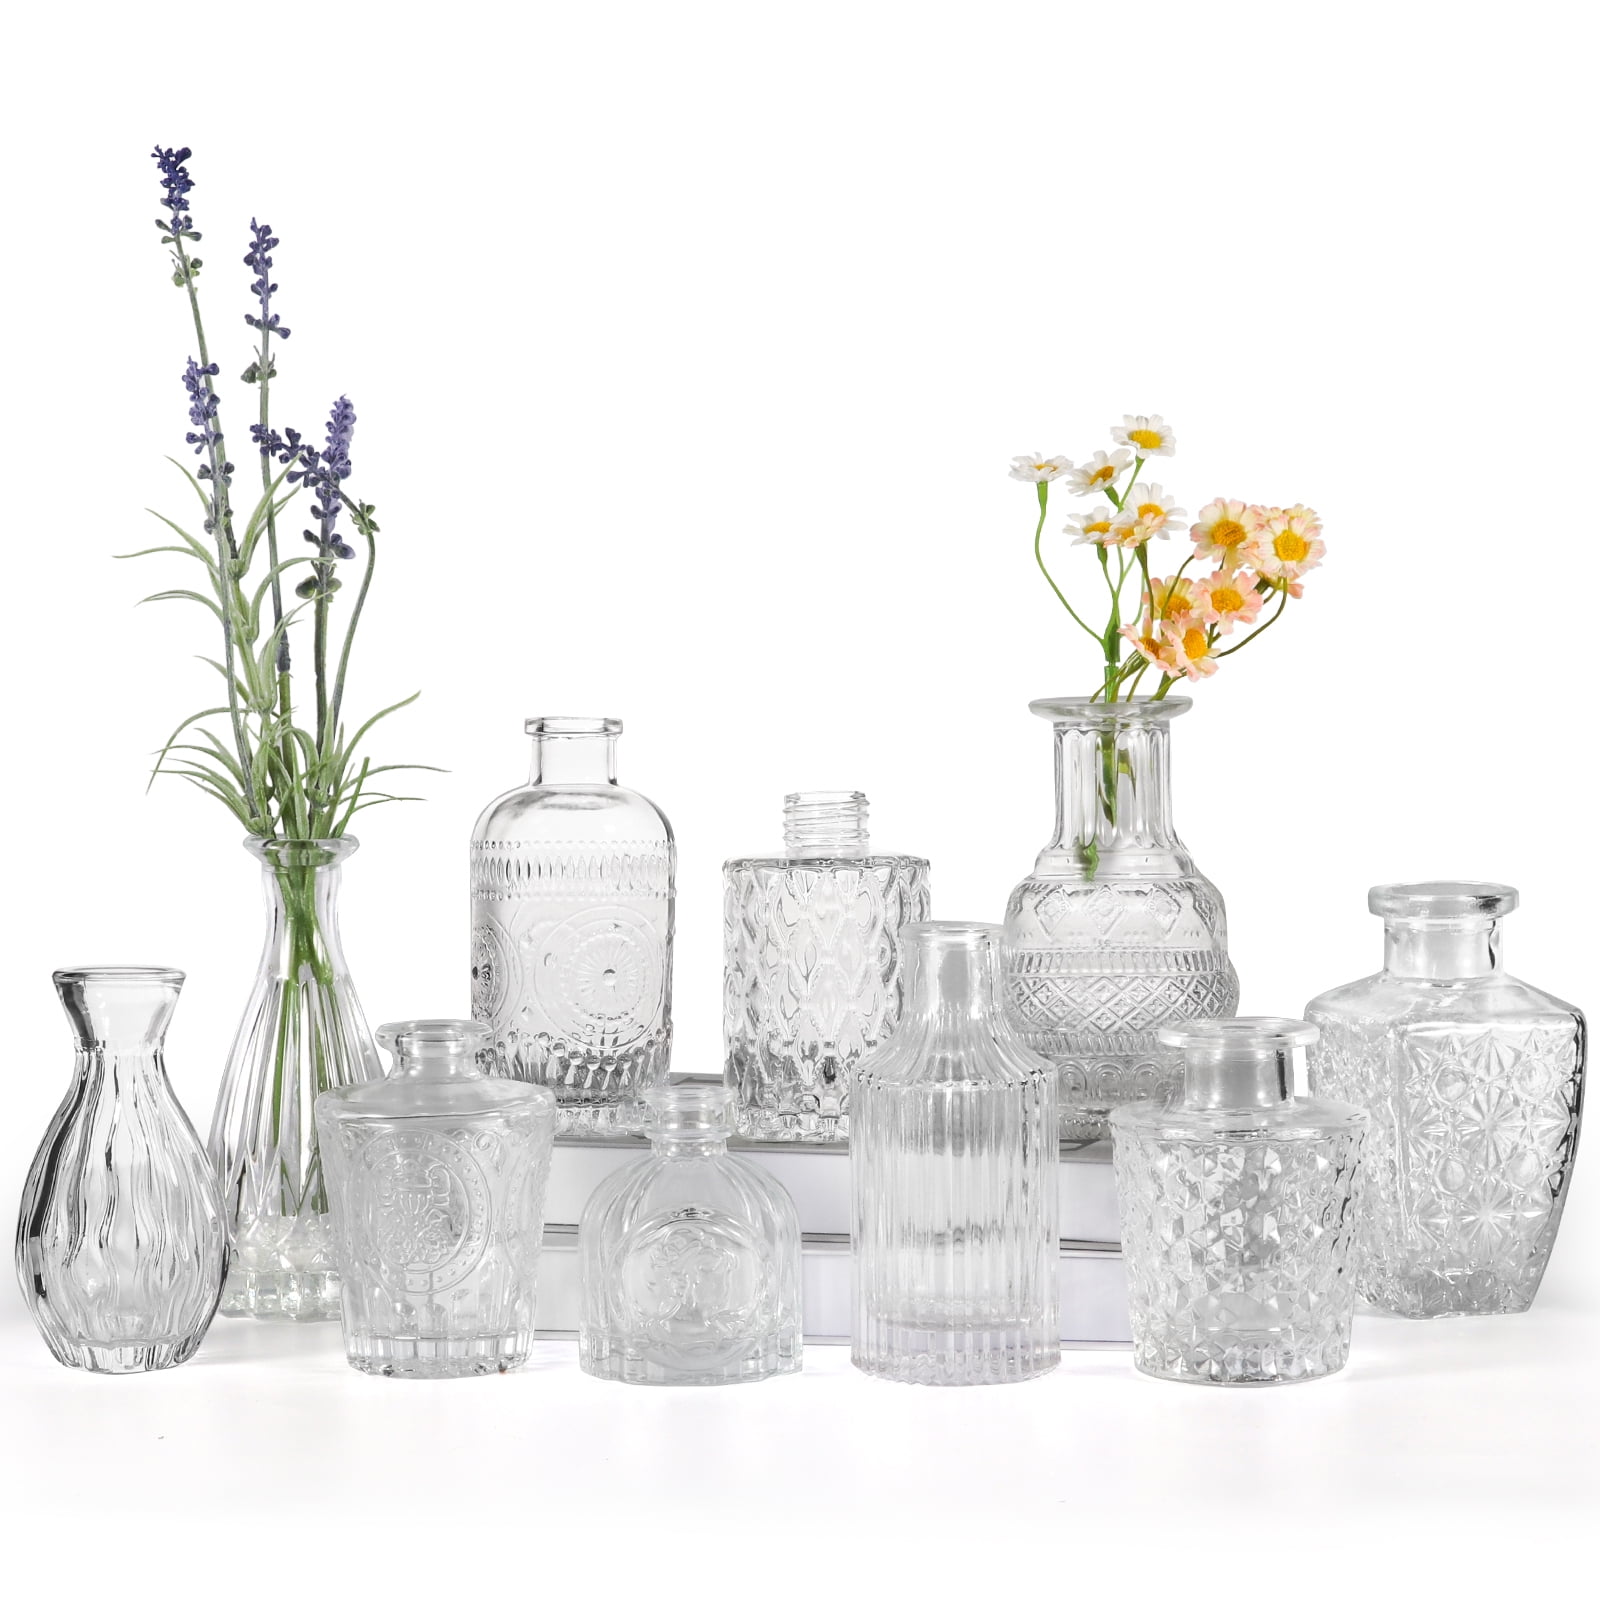 8pc Clear Vintage Glass Wedding Bottle Set, Assorted Wedding Table and  Centerpiece Display